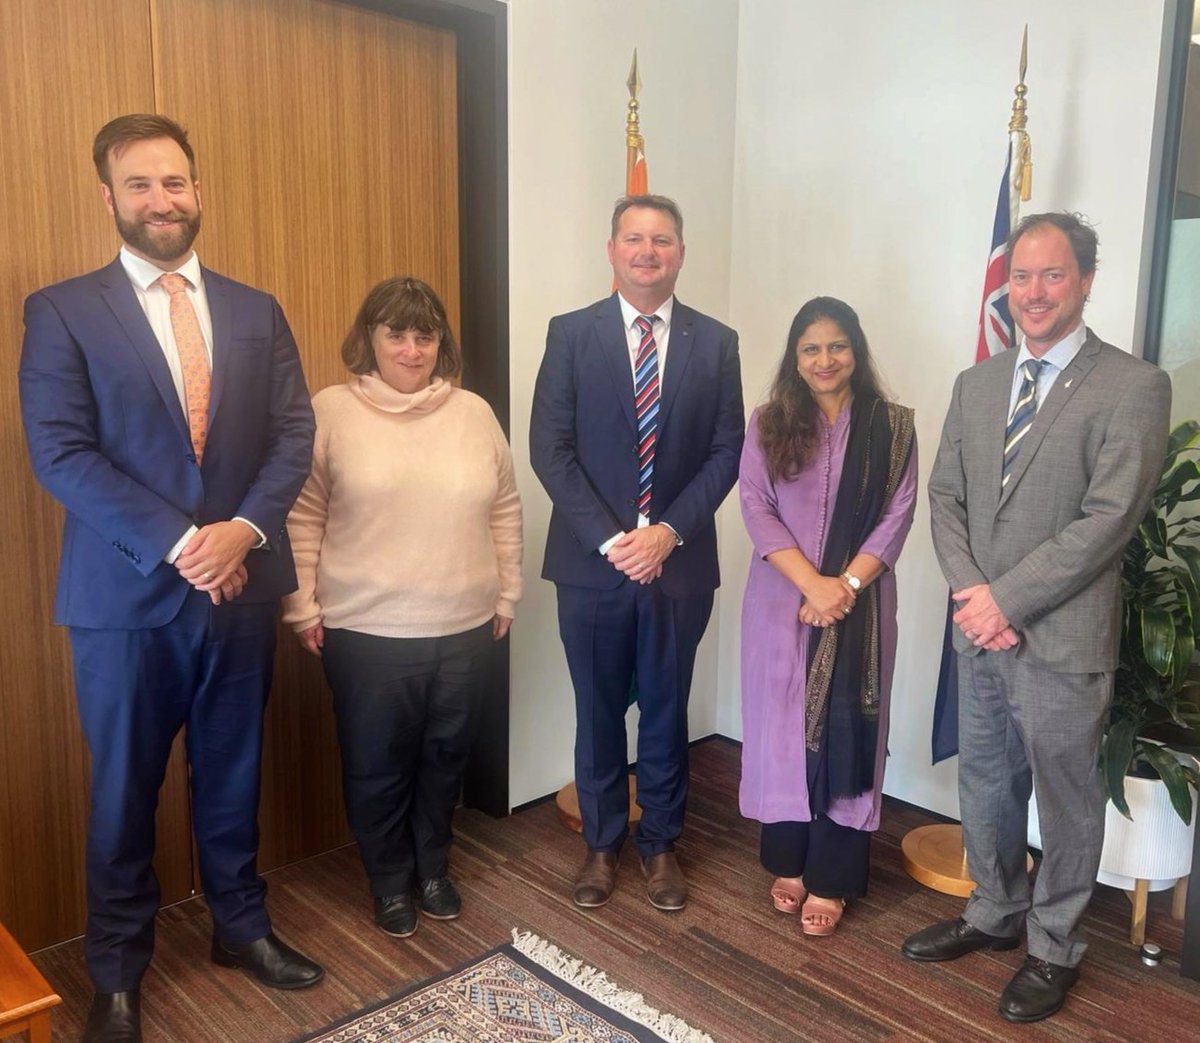 #InvestinIndia It was a pleasure to receive the Zespri team led by Chairman Nathan Flowerday in the High Commission today. Very useful discussions on ways to enhance bilateral cooperation in the Kiwifruit sector. @MEAIndia @investindia @CimGOI @IndianDiplomacy @ZespriCorporate